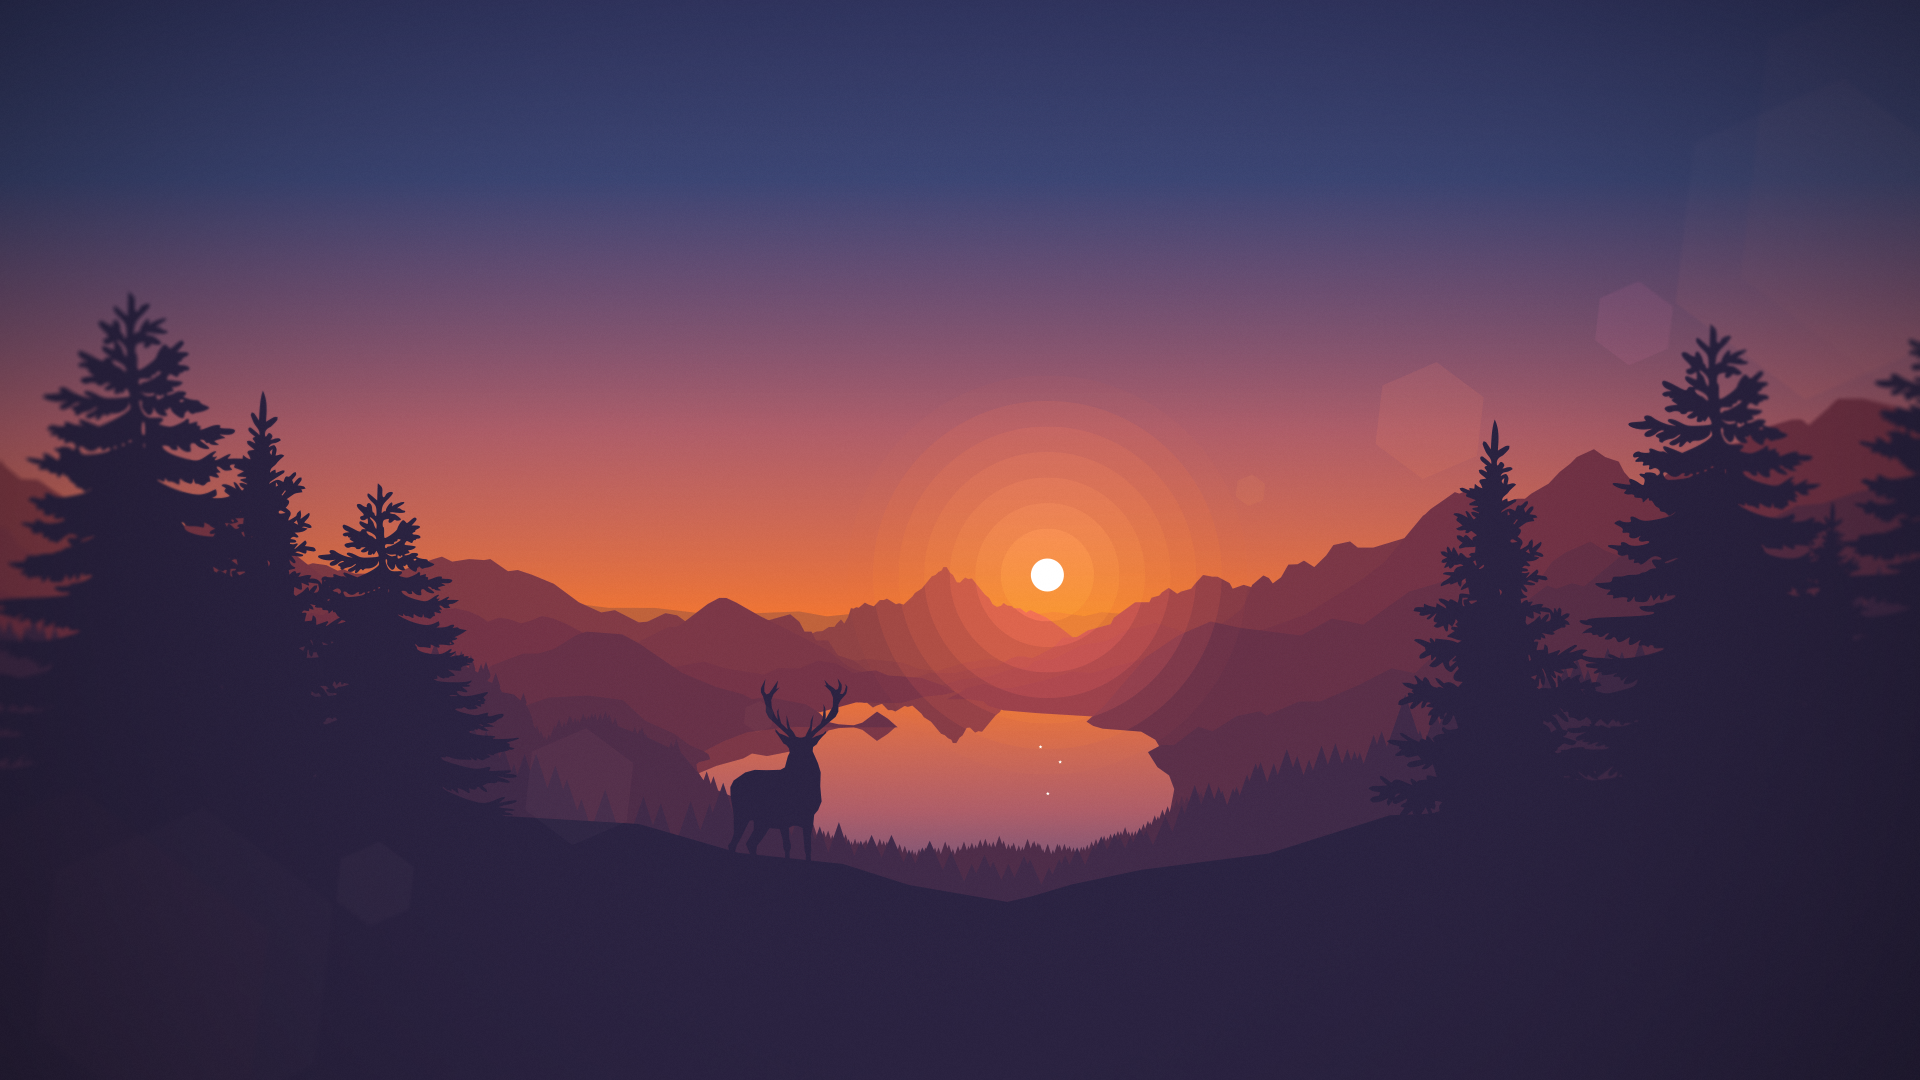 General 1920x1080 deer artwork silhouette landscape nature digital art trees pine trees sunset lake hills animals clear sky Firewatch video games drawing video game art